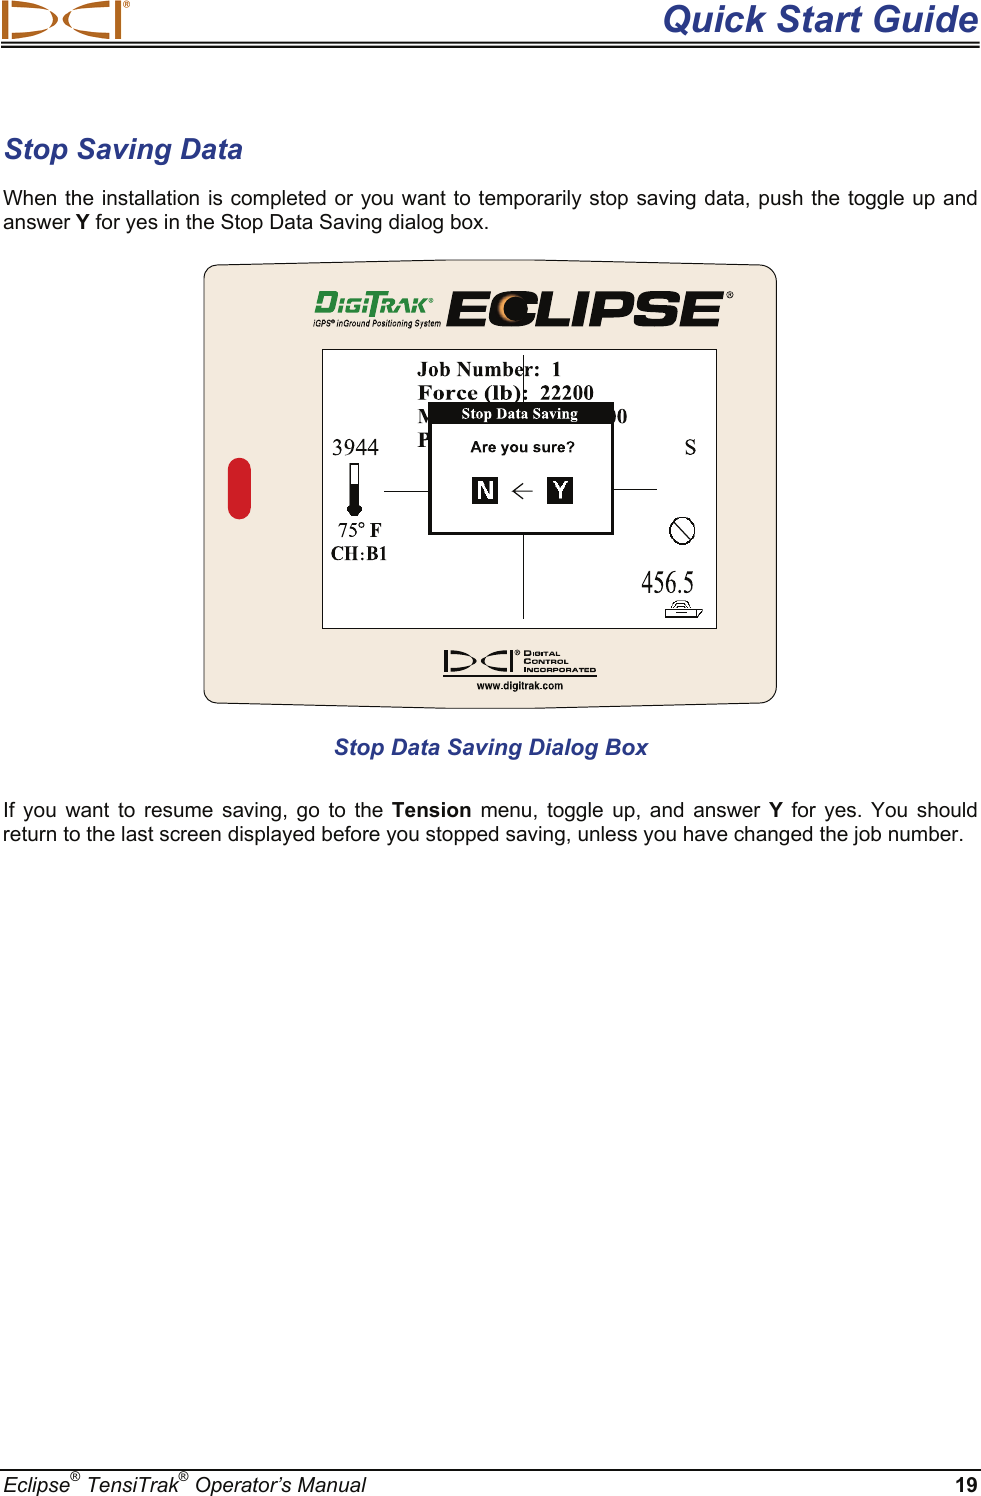  Quick Start Guide Eclipse® TensiTrak® Operator’s Manual 19 Stop Saving Data When the installation is completed or you want to temporarily stop saving data, push the toggle up and answer Y for yes in the Stop Data Saving dialog box.   Stop Data Saving Dialog Box If you want to resume saving, go to the Tension menu, toggle up, and answer Y  for yes. You should return to the last screen displayed before you stopped saving, unless you have changed the job number.     